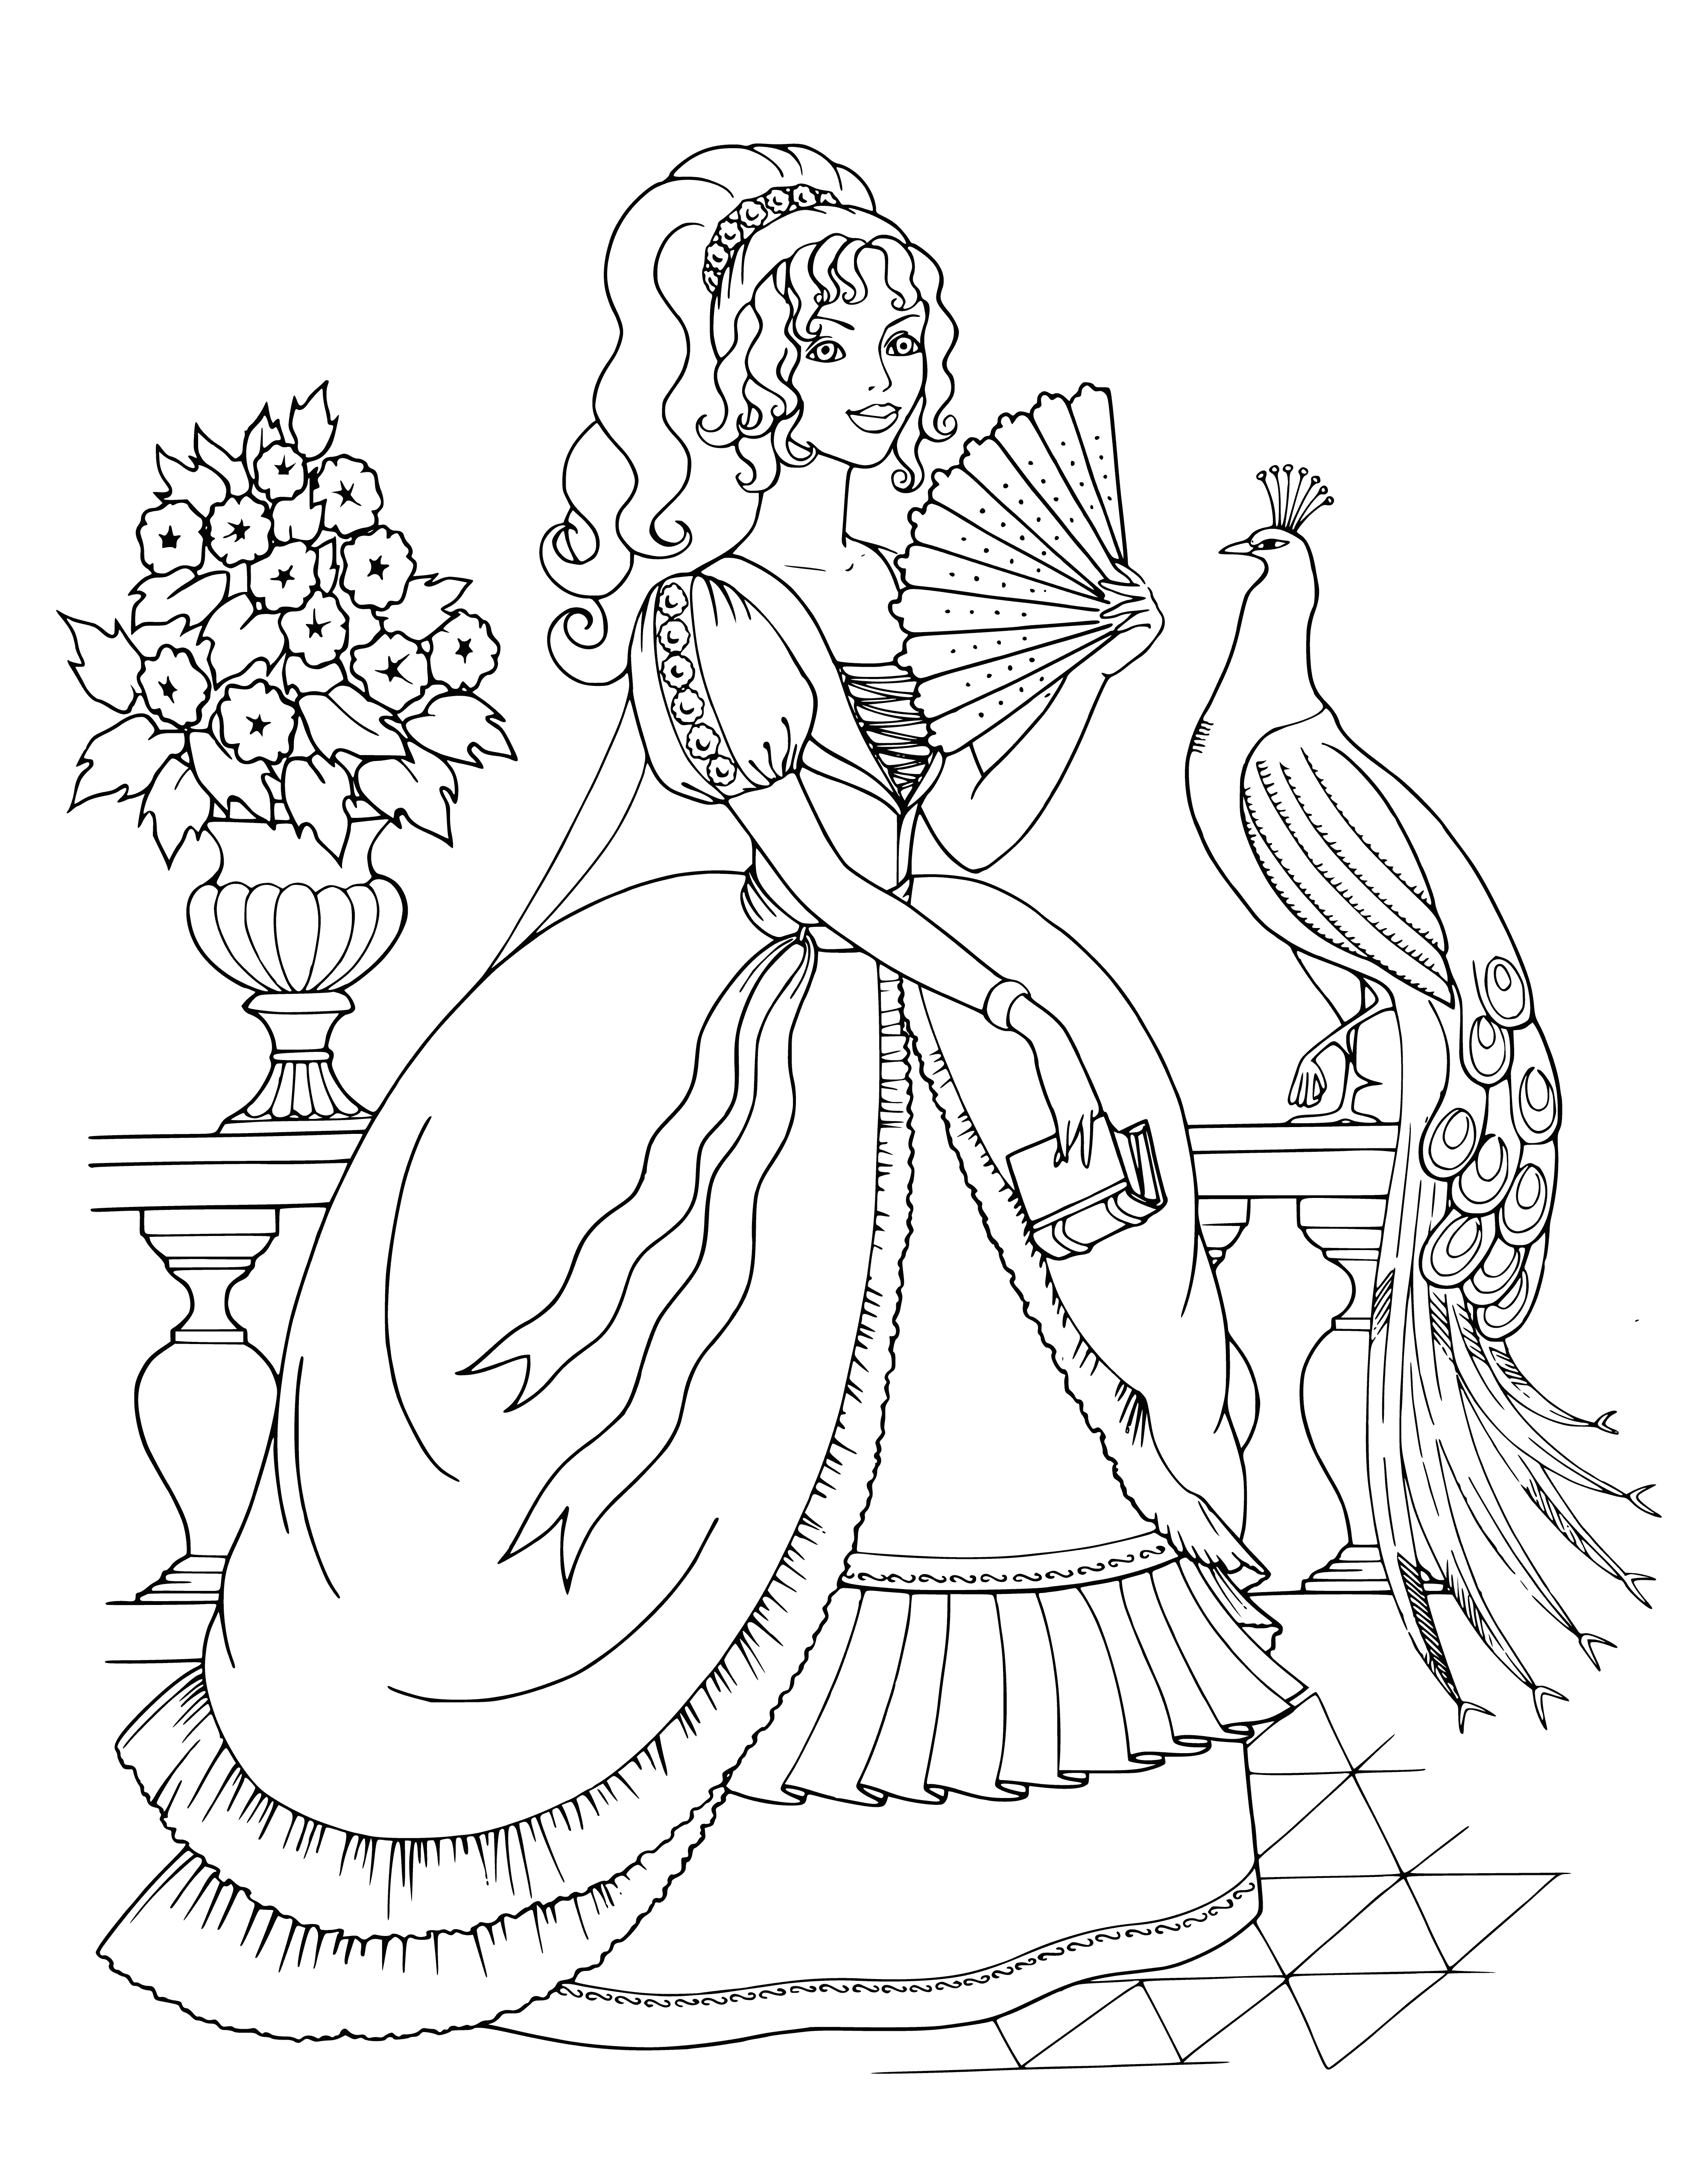 coloring page: Princess stands next to peacock in pink dress and bow, holding pink umbrella.